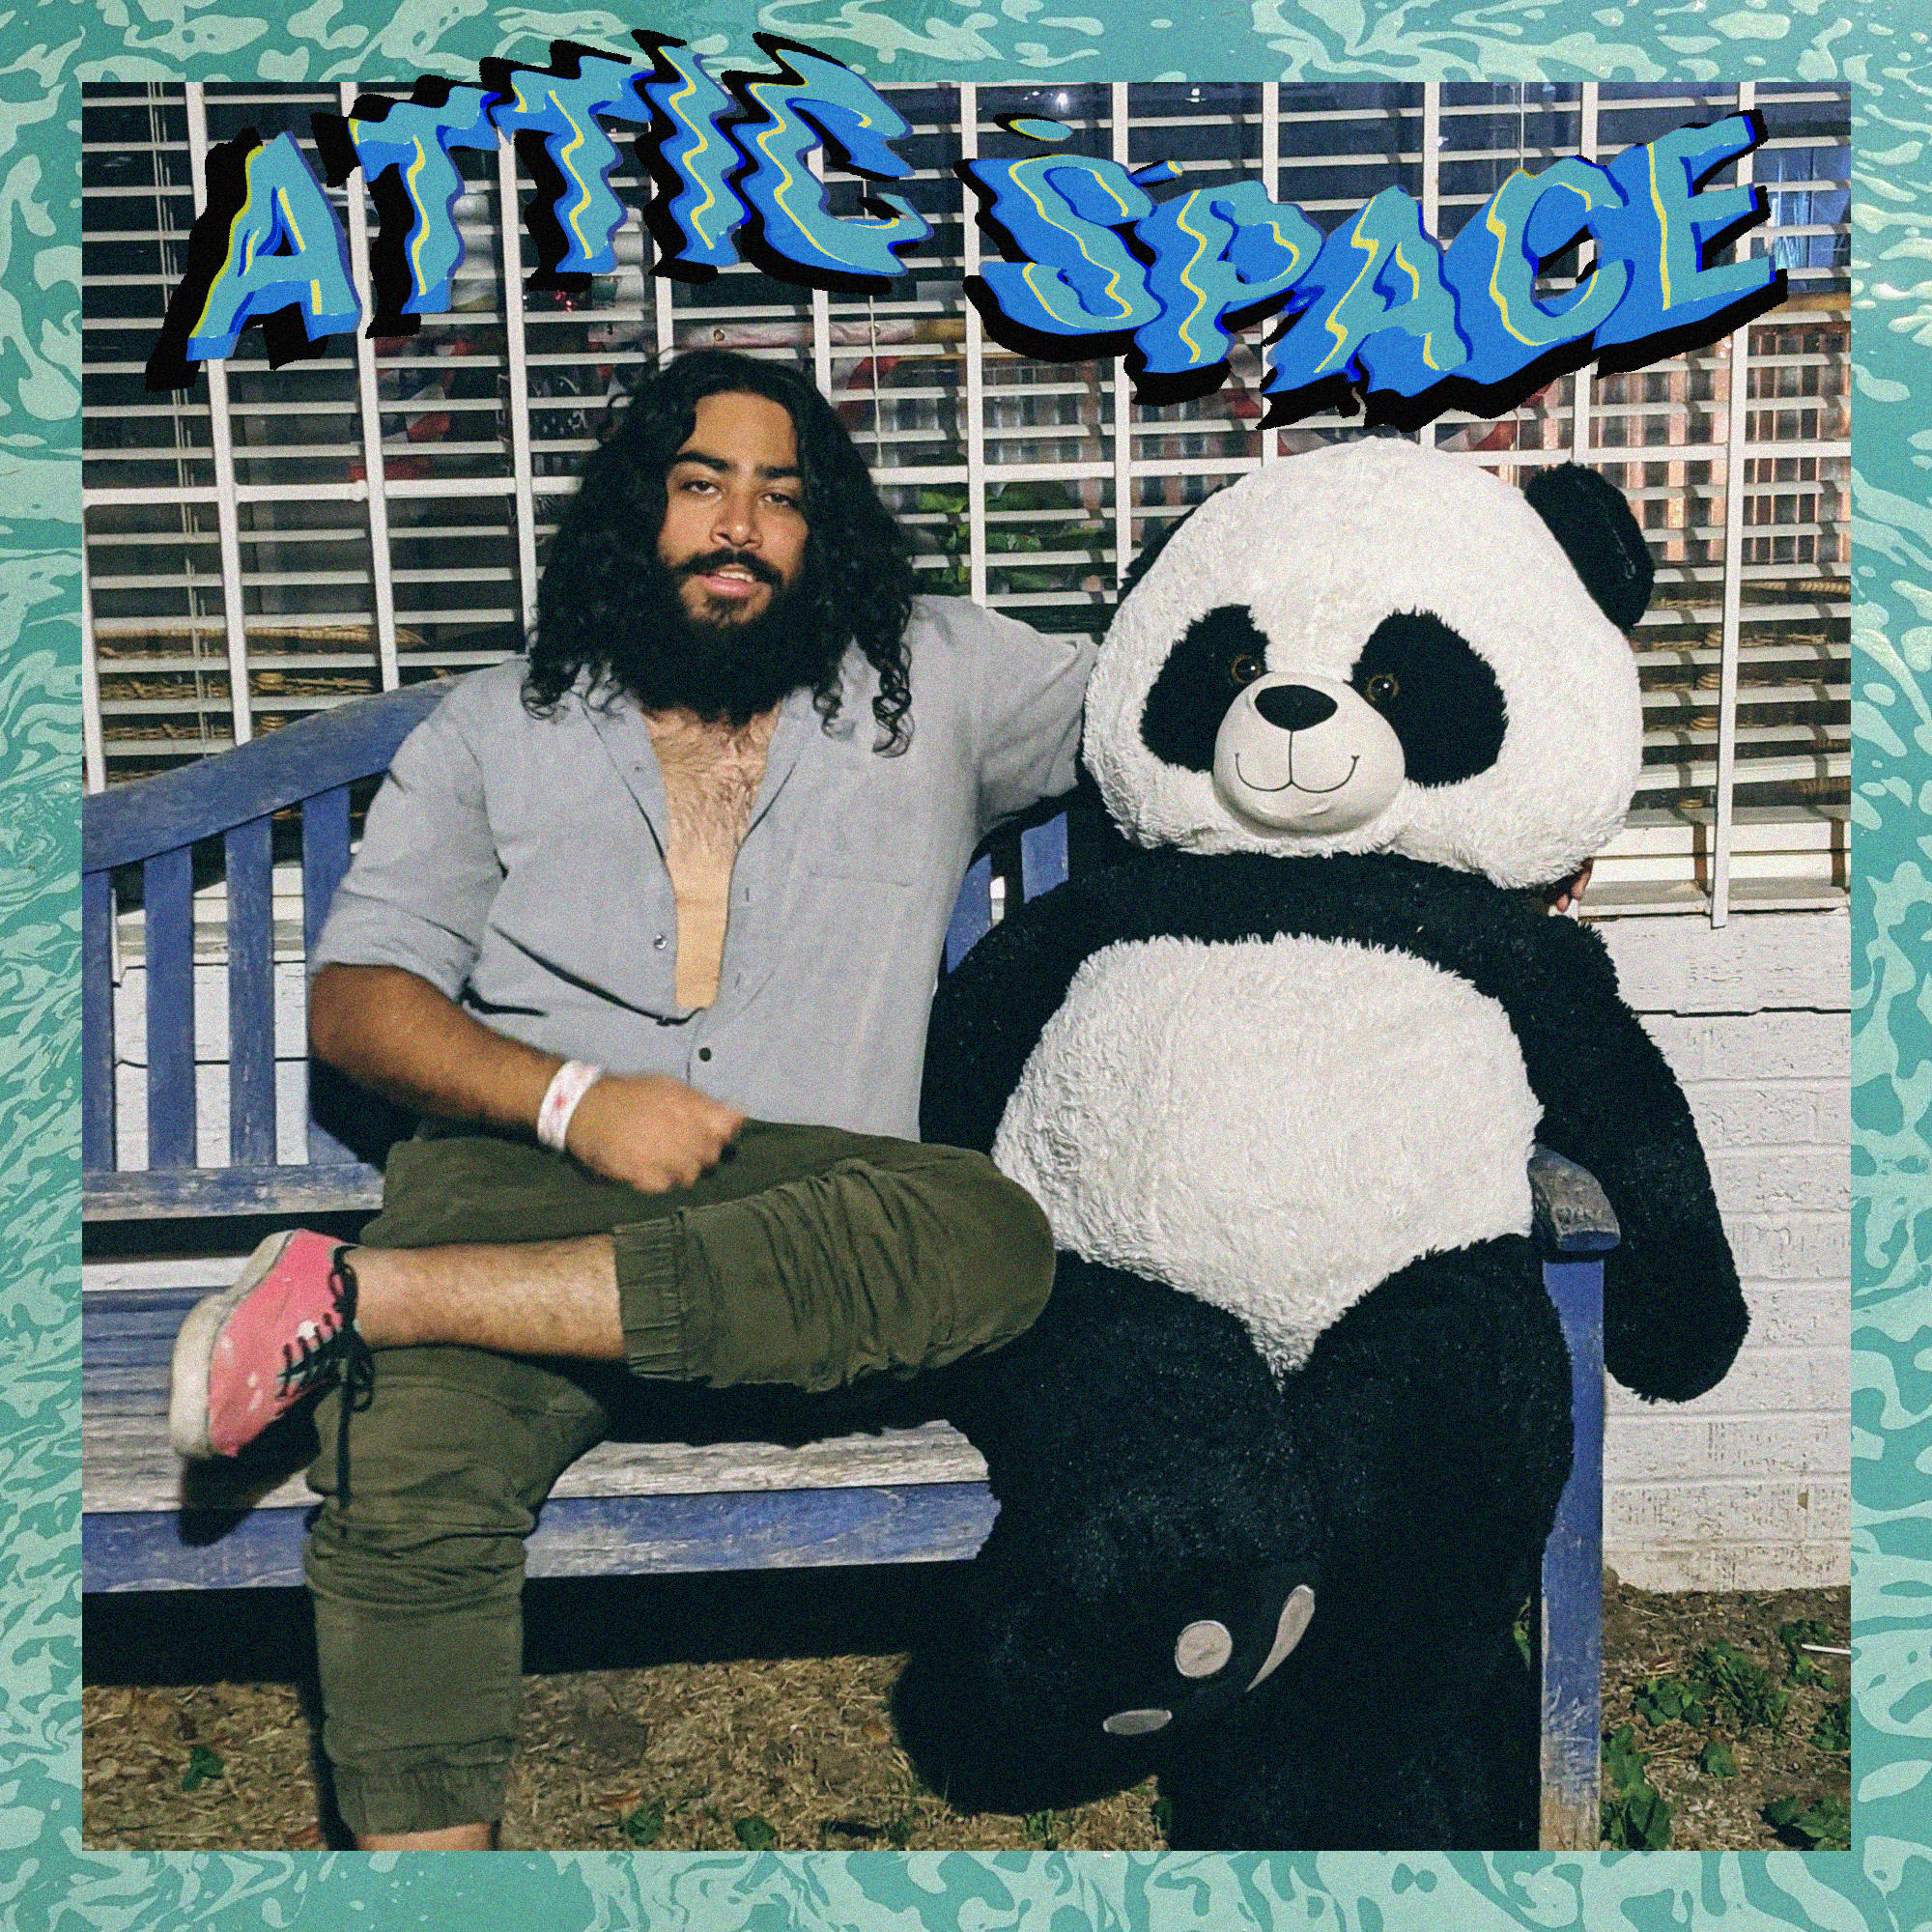 Musician Abraham Khan sitting on a bench next to an enormous stuffed panda, with the name of his band, Attic Space, above them.